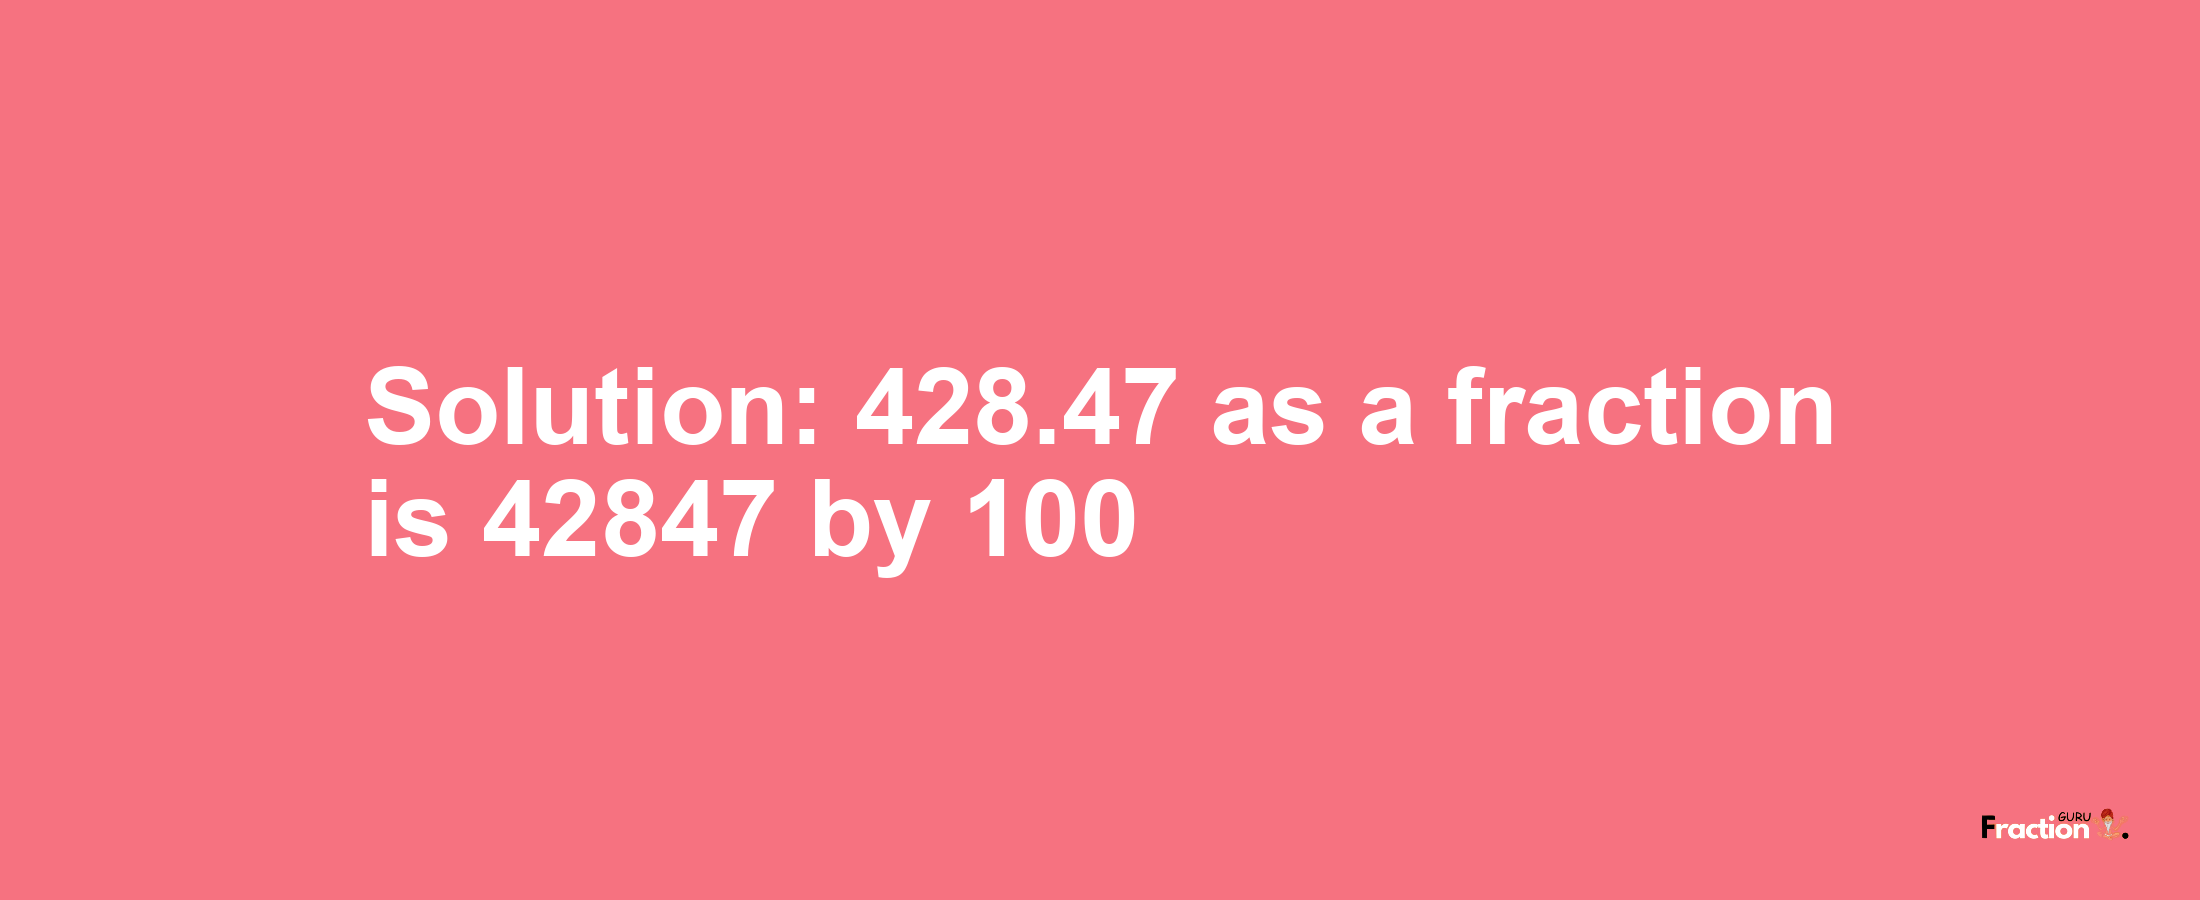 Solution:428.47 as a fraction is 42847/100